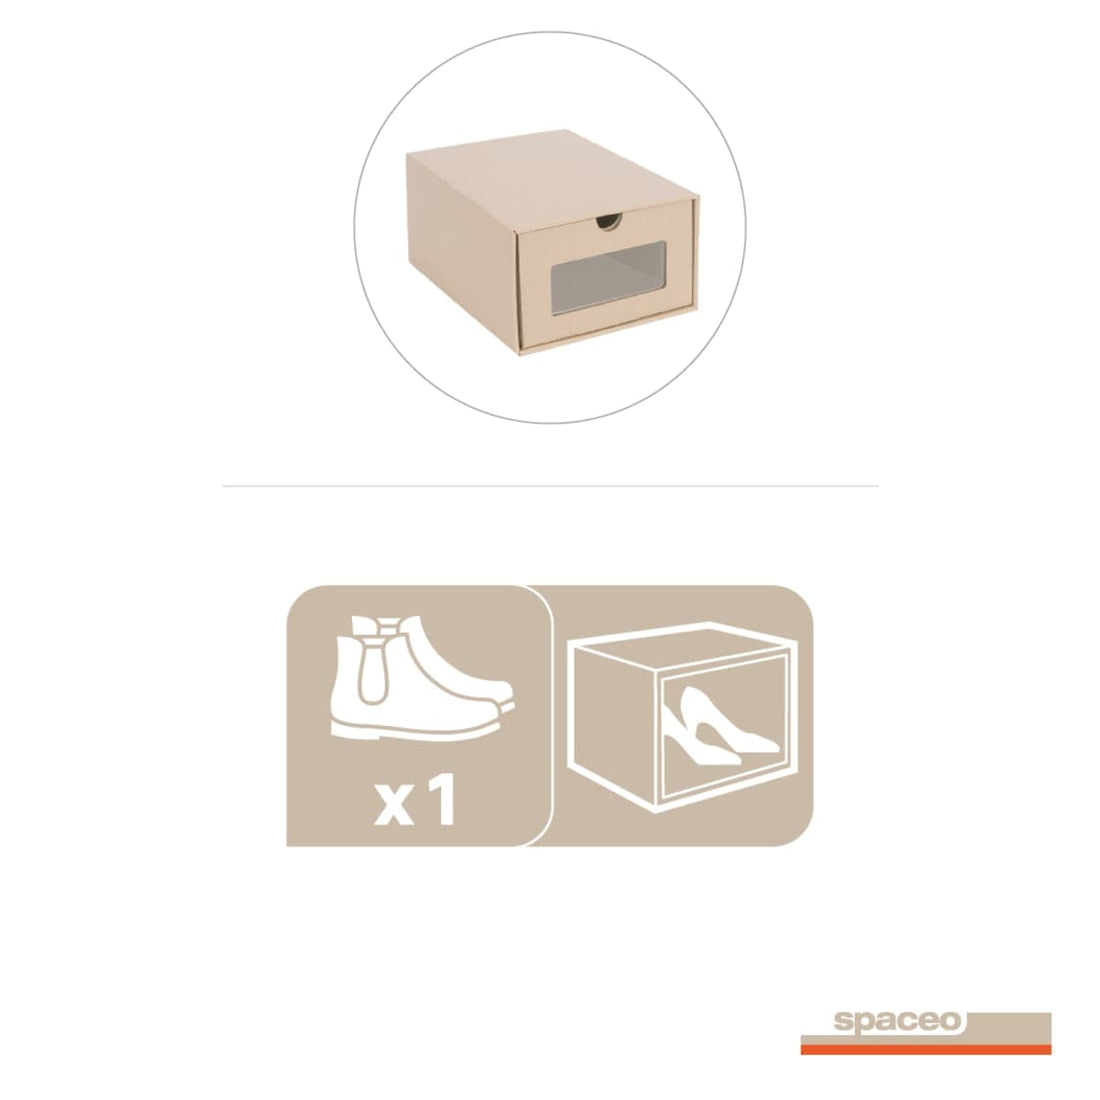 SET 2 CARDBOARD BOXES FOR WOMEN'S SHOES - best price from Maltashopper.com BR410006315